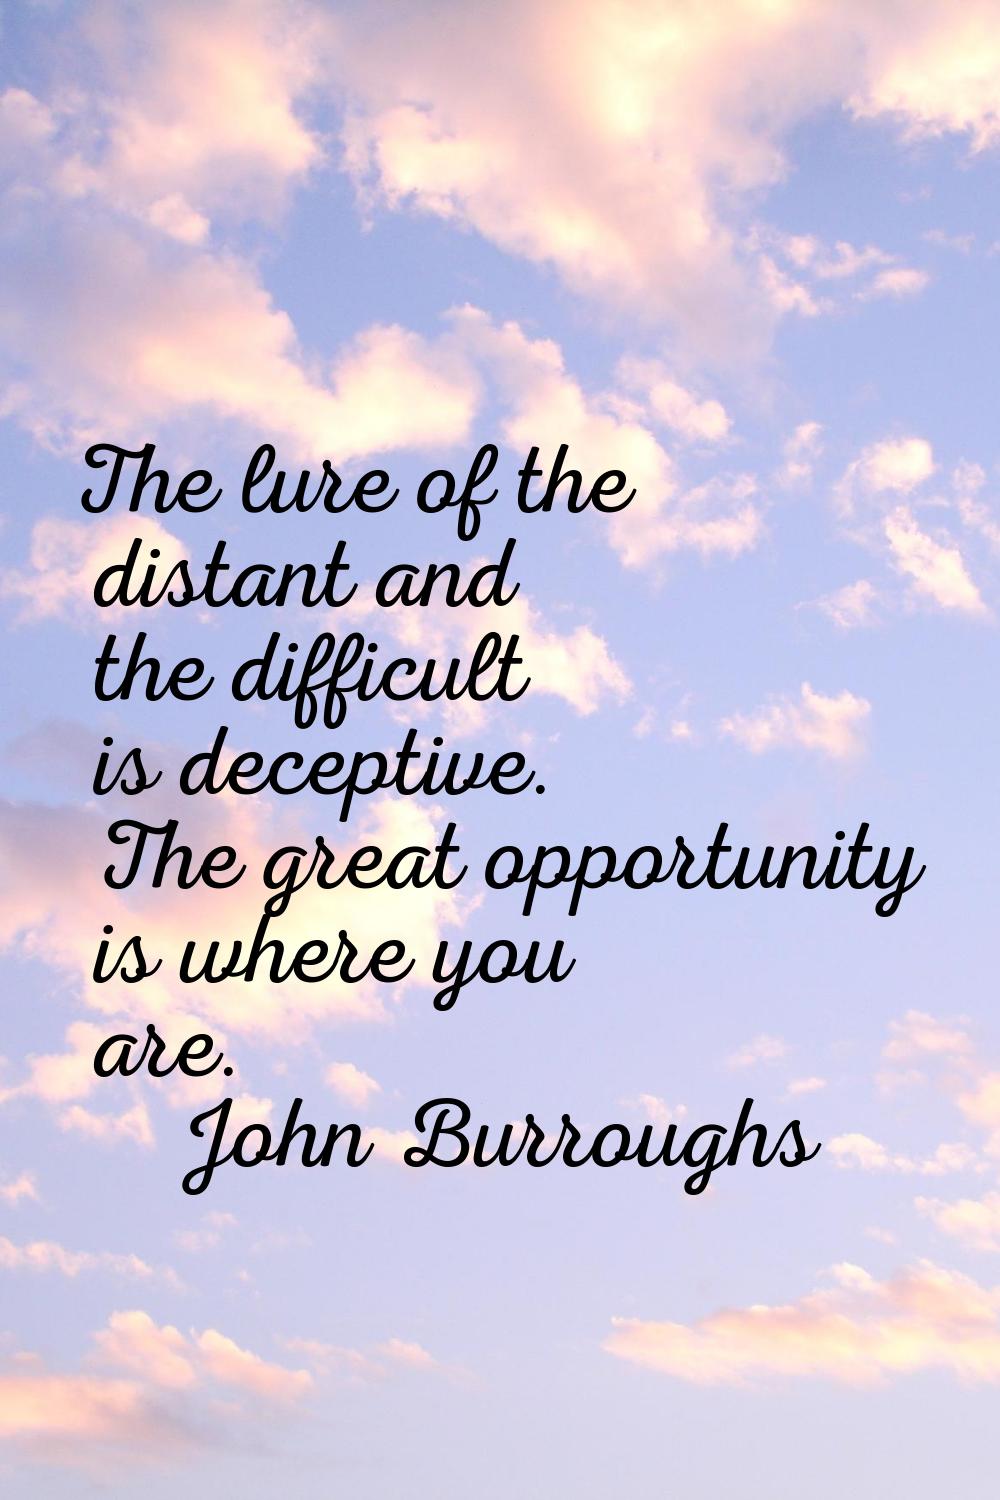 The lure of the distant and the difficult is deceptive. The great opportunity is where you are.